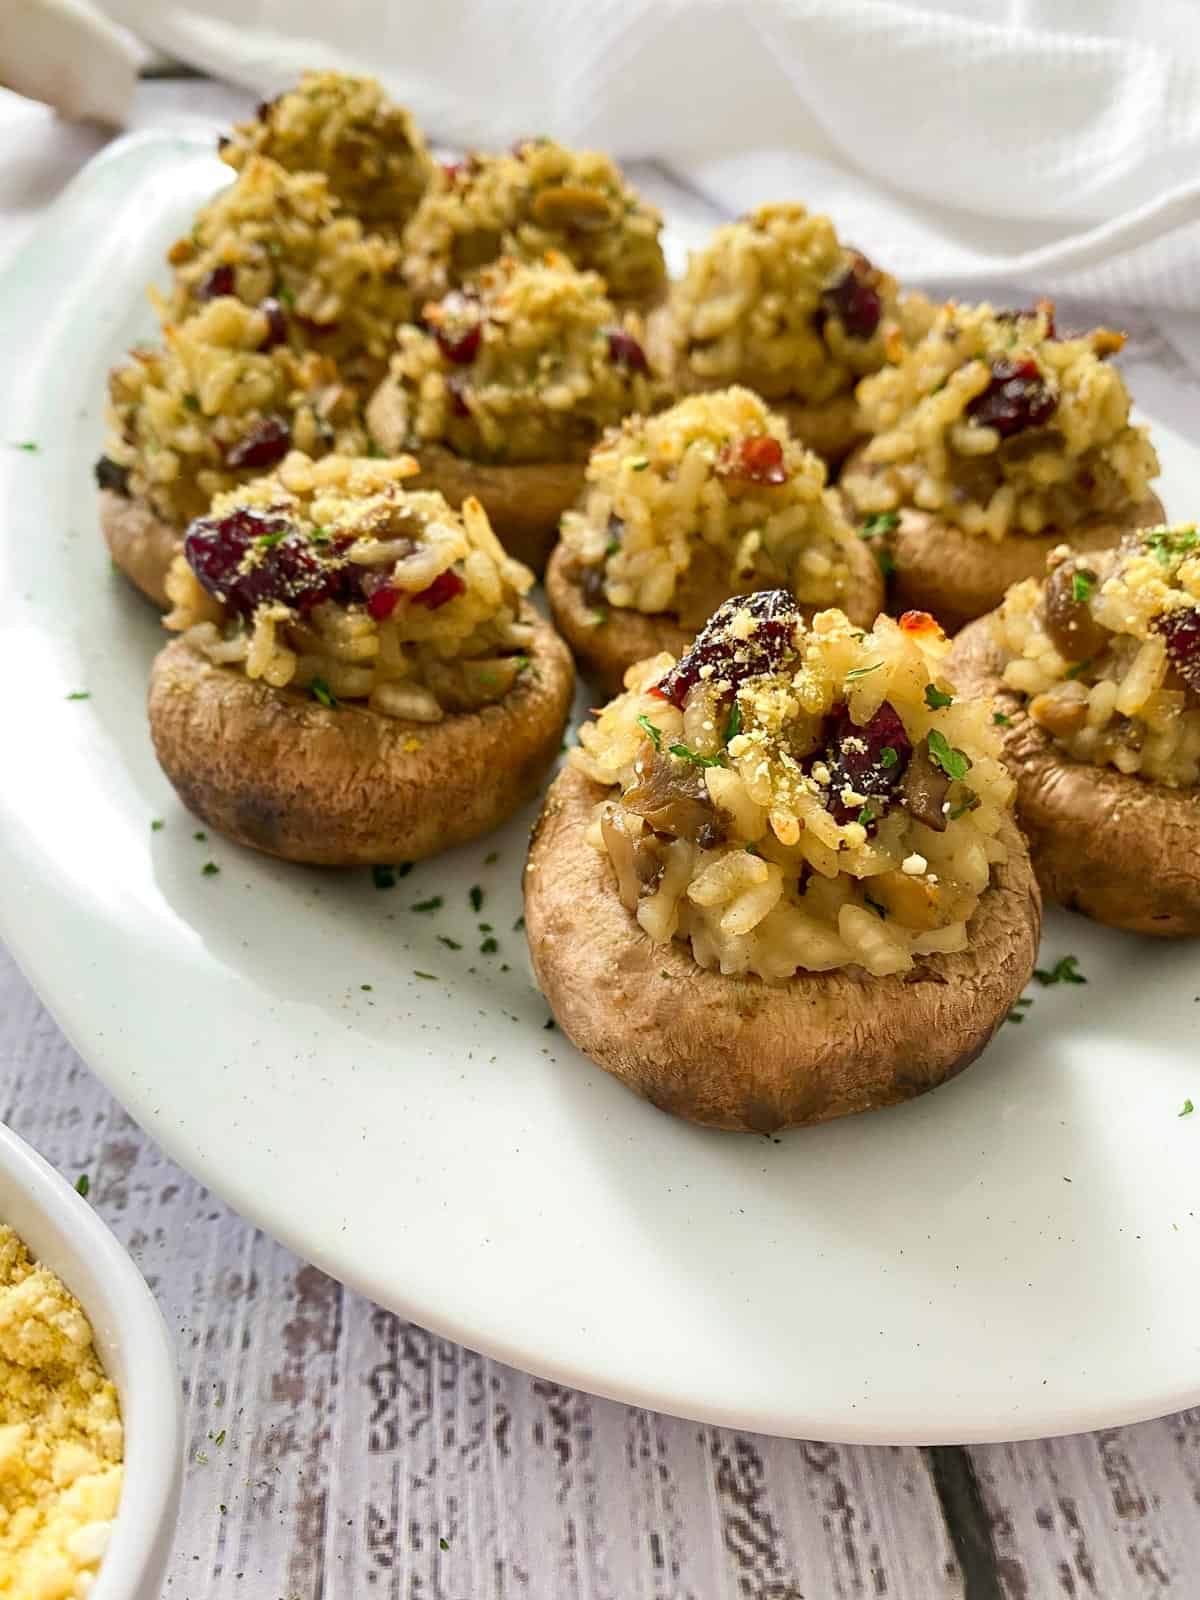 Rice and cranberries stuffed into mushrooms on white dish with parsley garnish,.